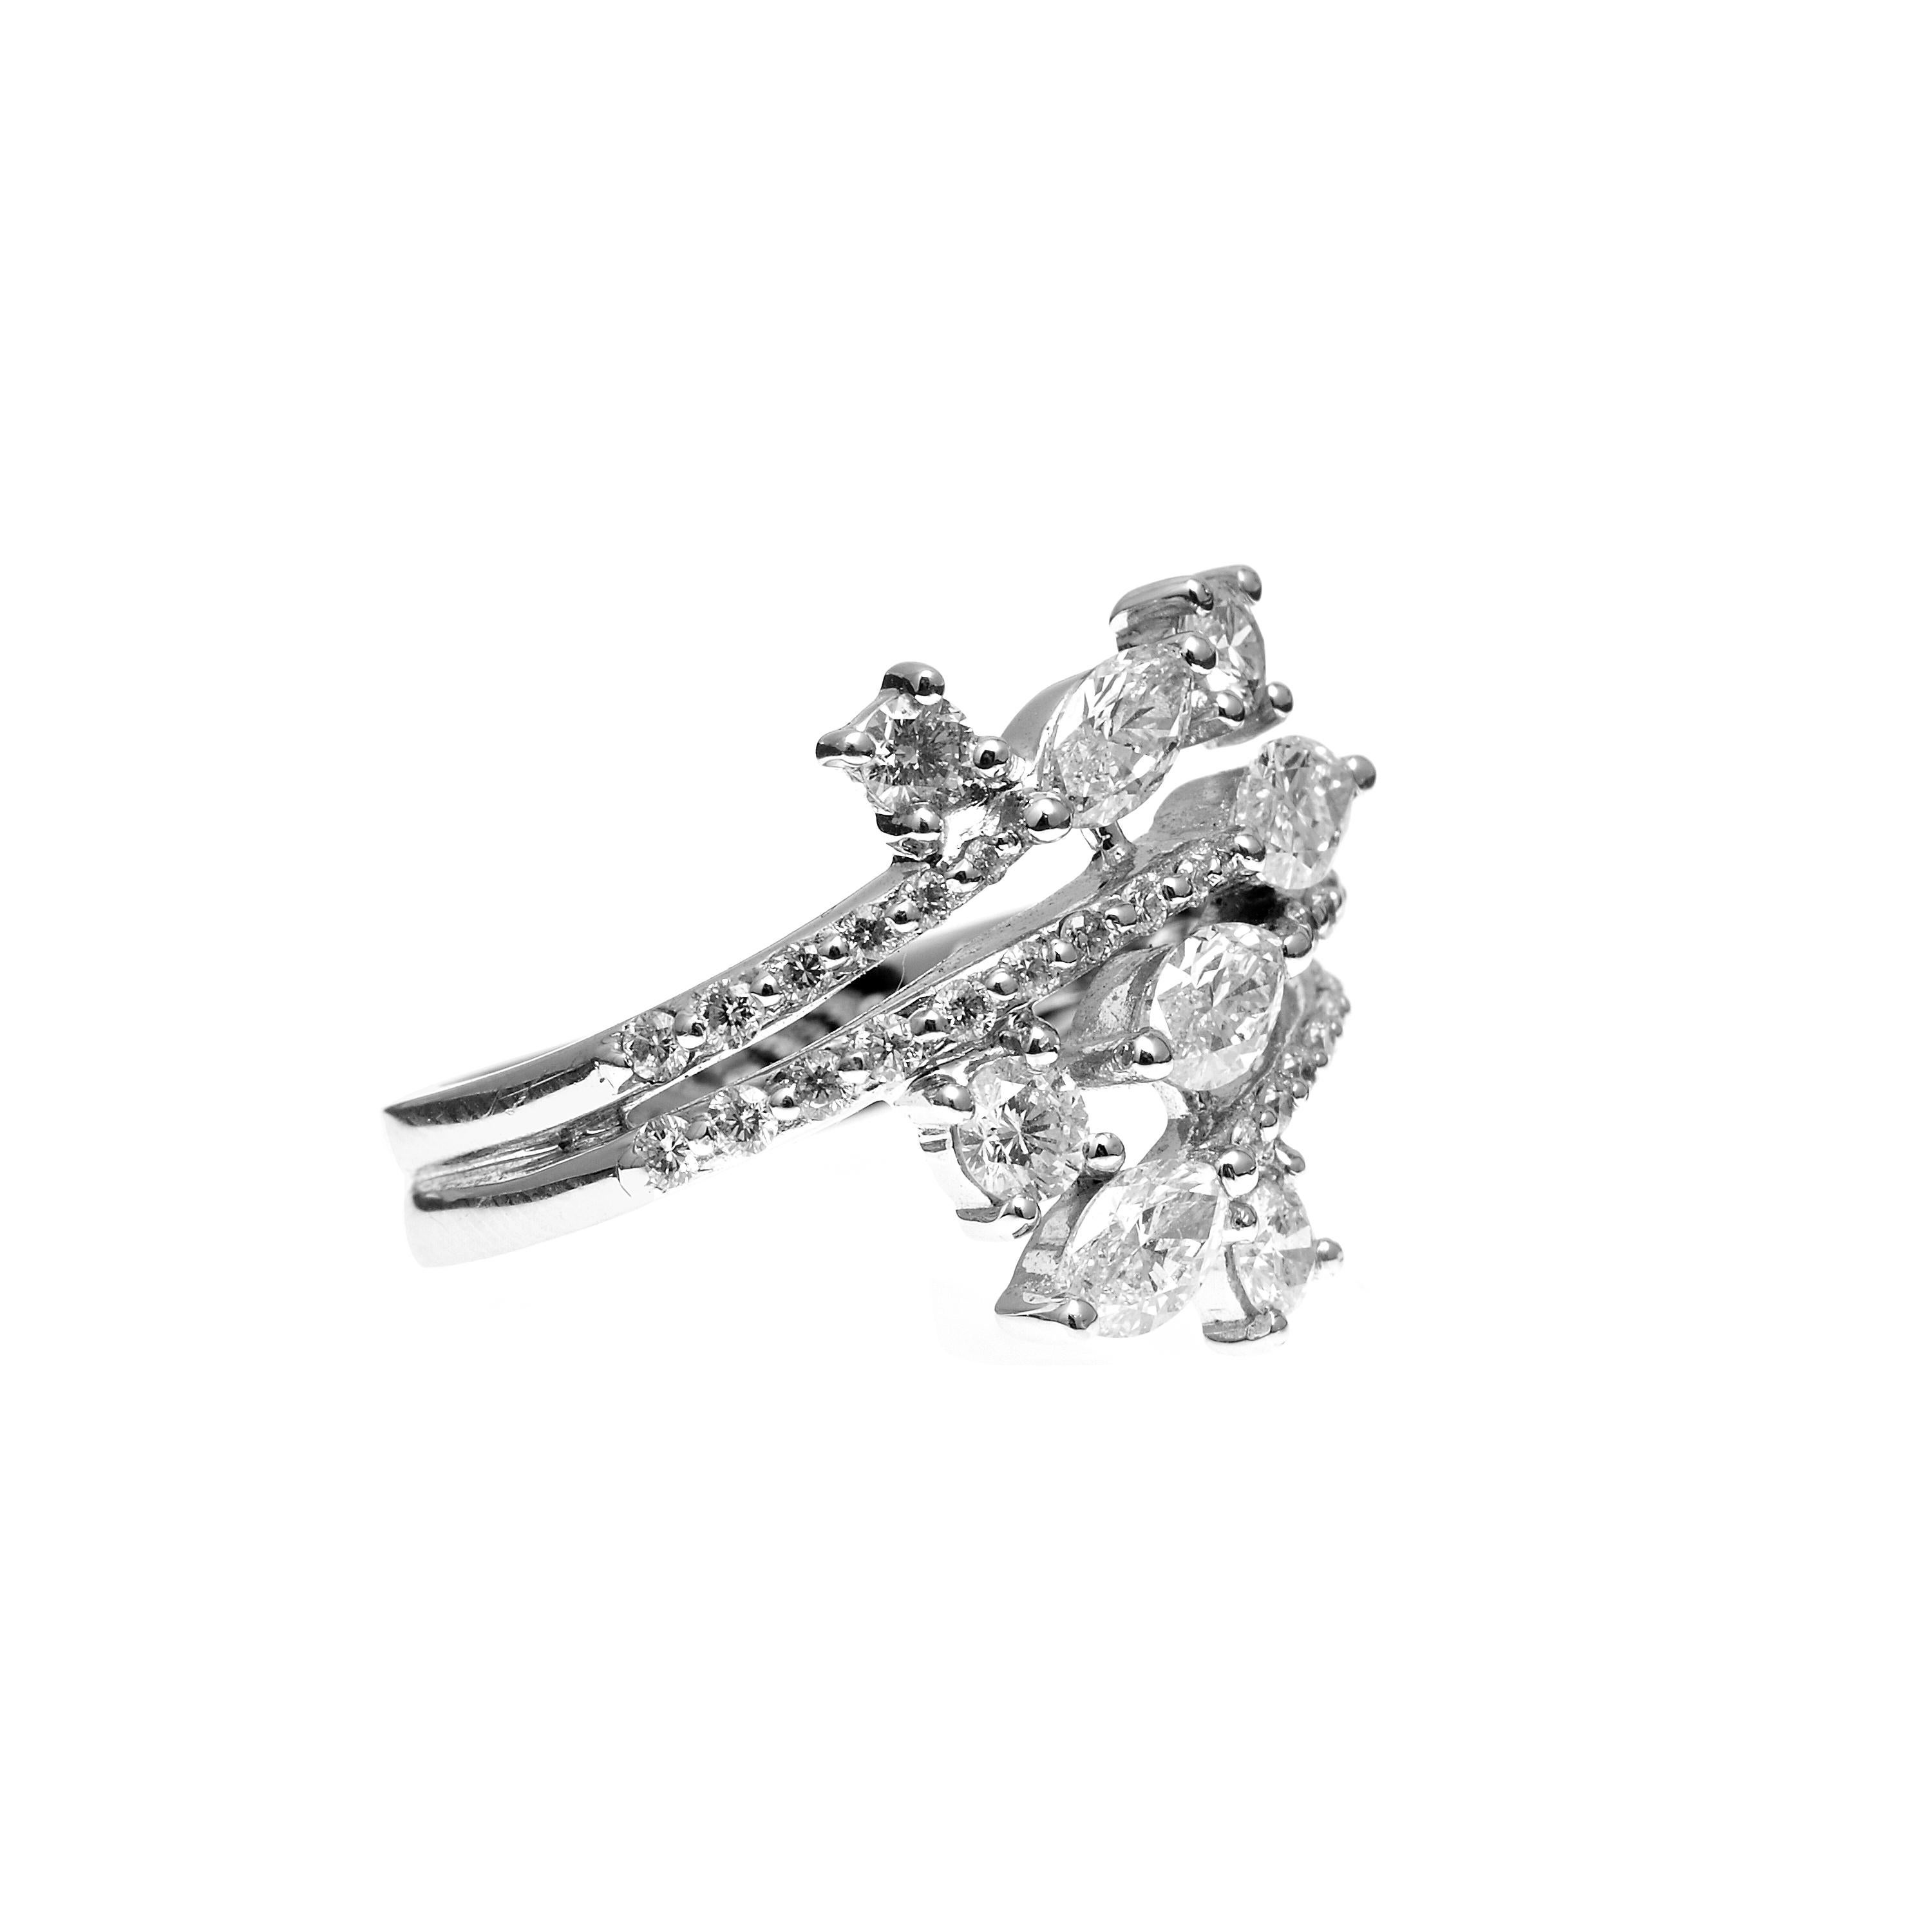 This interesting and modern ring has unique flair with edgy mixed diamond shapes. Featuring a total of 1.53ct of dazzling diamonds. The Marquise shapes contrast so nicely against the small round accent stones. Hand finished with 18kt white gold to